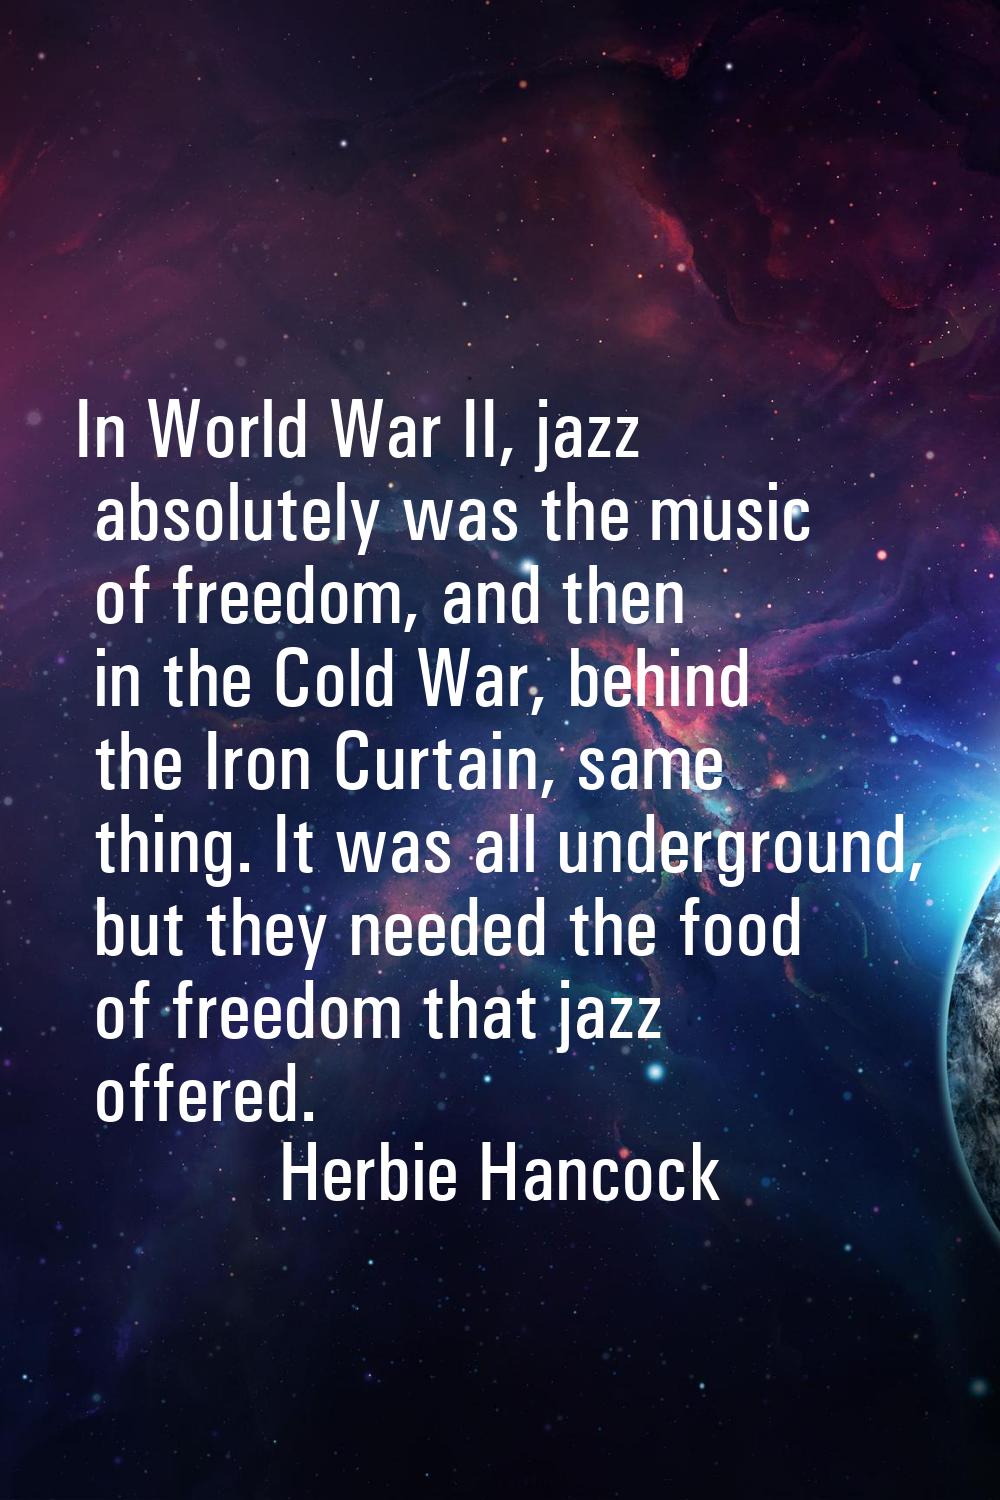 In World War II, jazz absolutely was the music of freedom, and then in the Cold War, behind the Iro